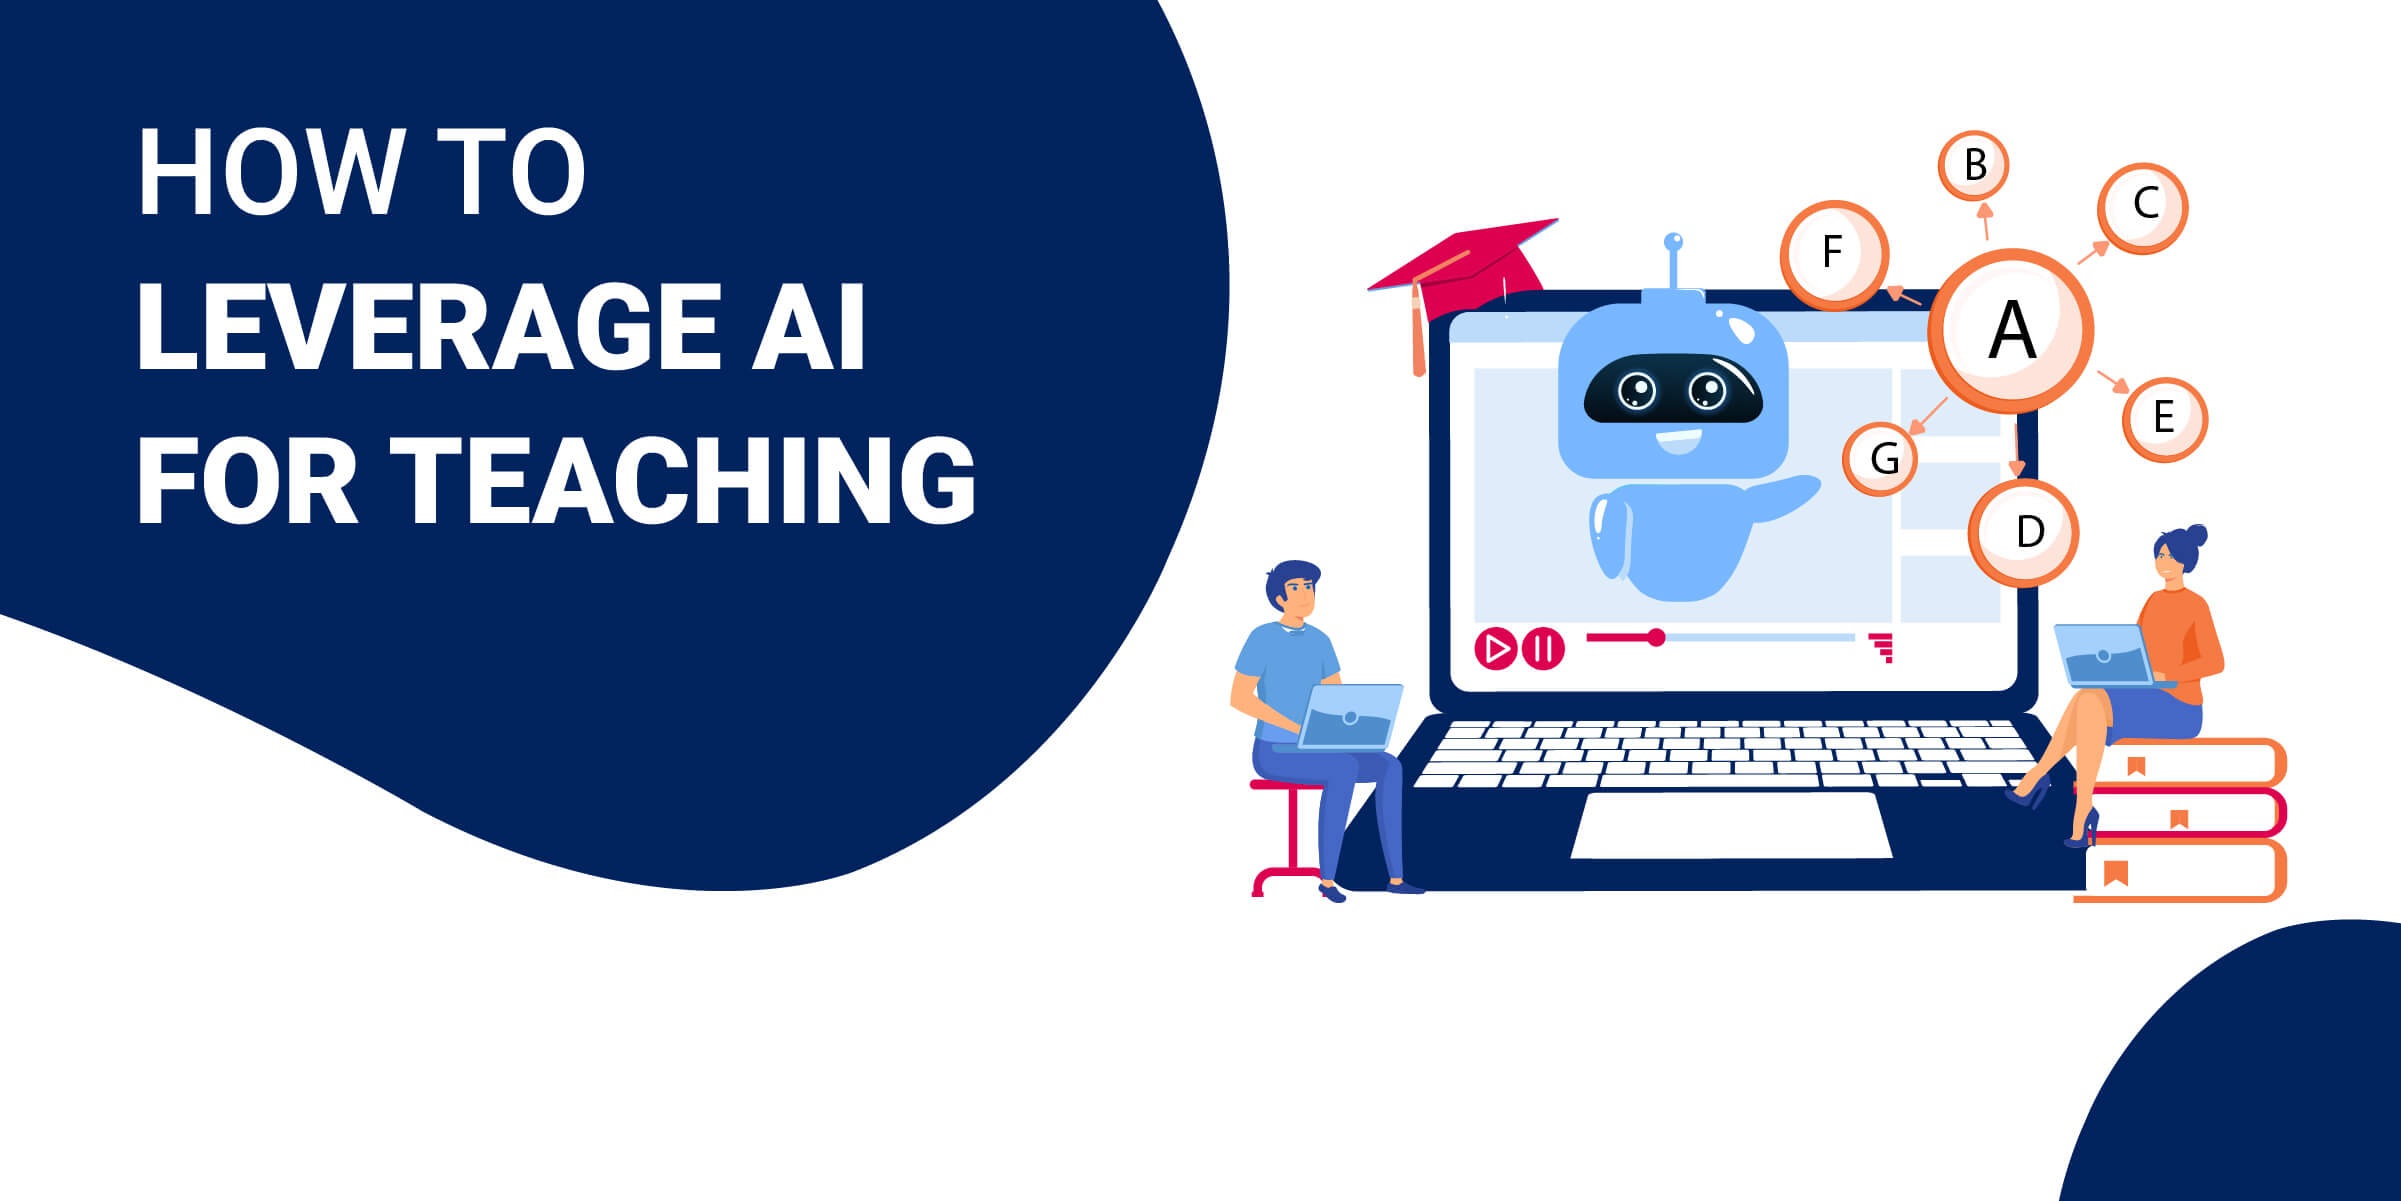 How to Leverage AI for Teaching